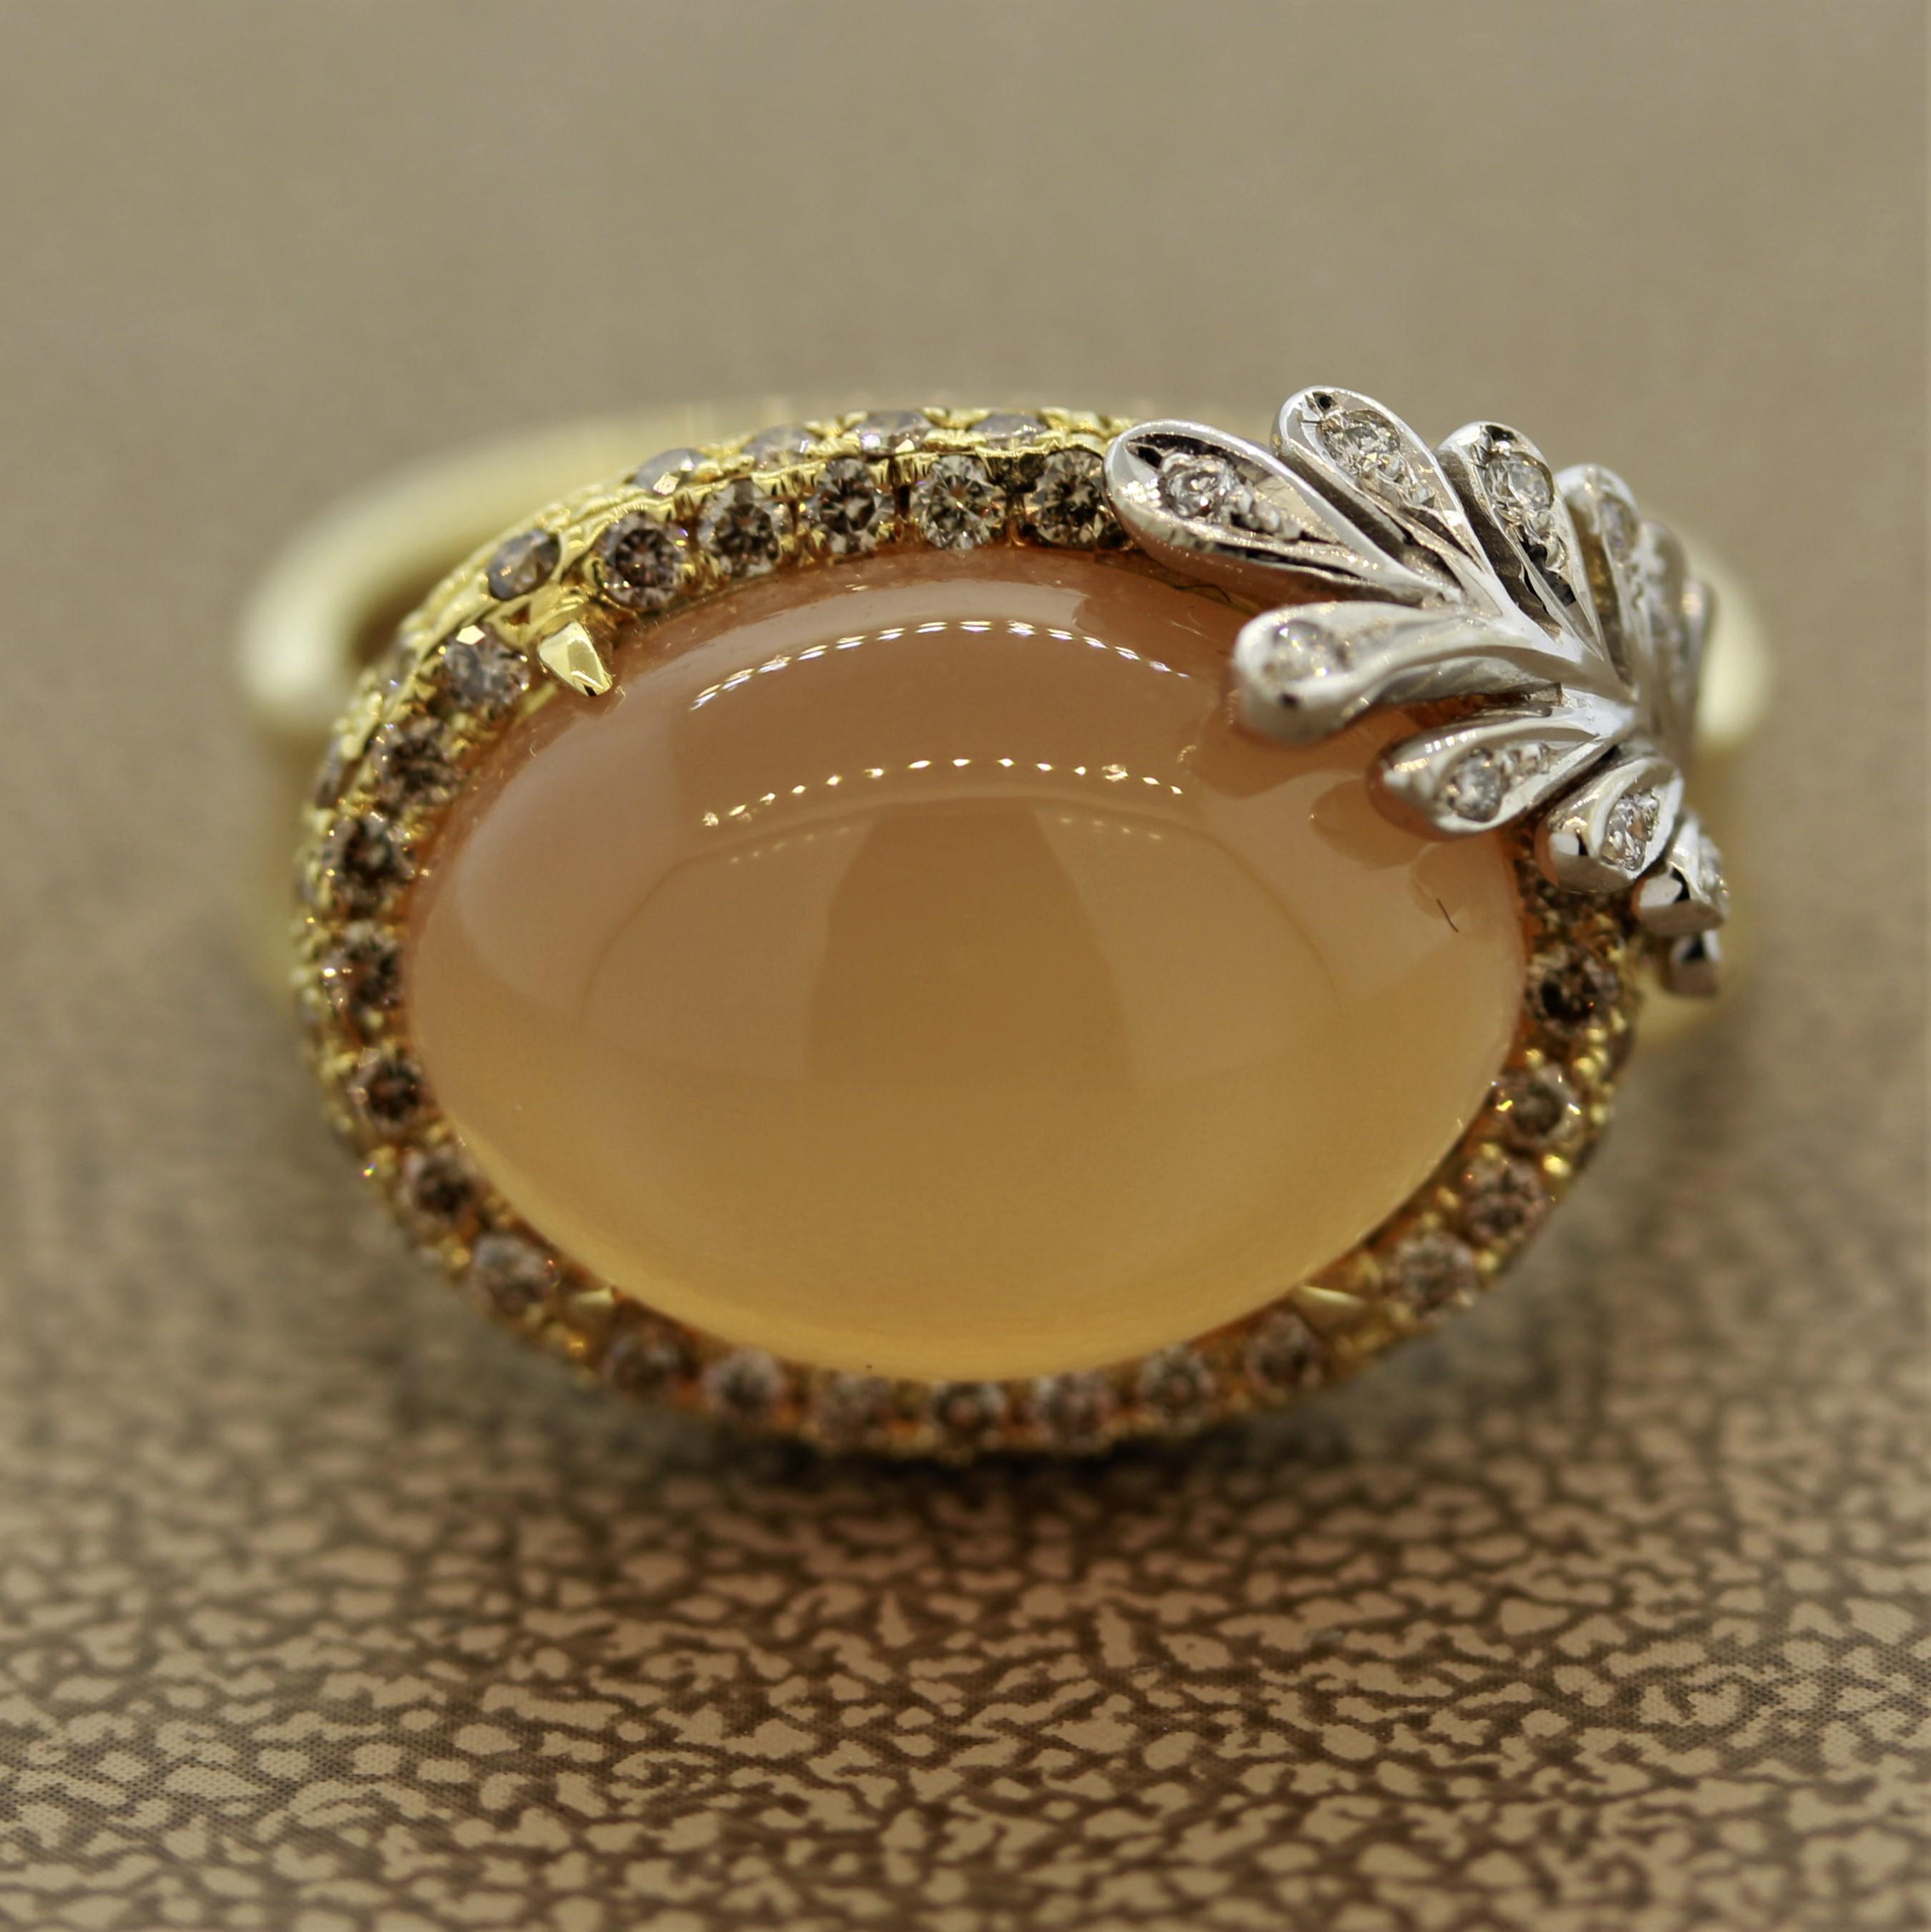 A lovely soft orange moonstone ring out of a fairytale. The moonstone weighs 8.69 carats and has excellent adularescence which makes it appear that light is rolling of the surface of the stone (a unique phenomenon of moonstones). Adding to that is